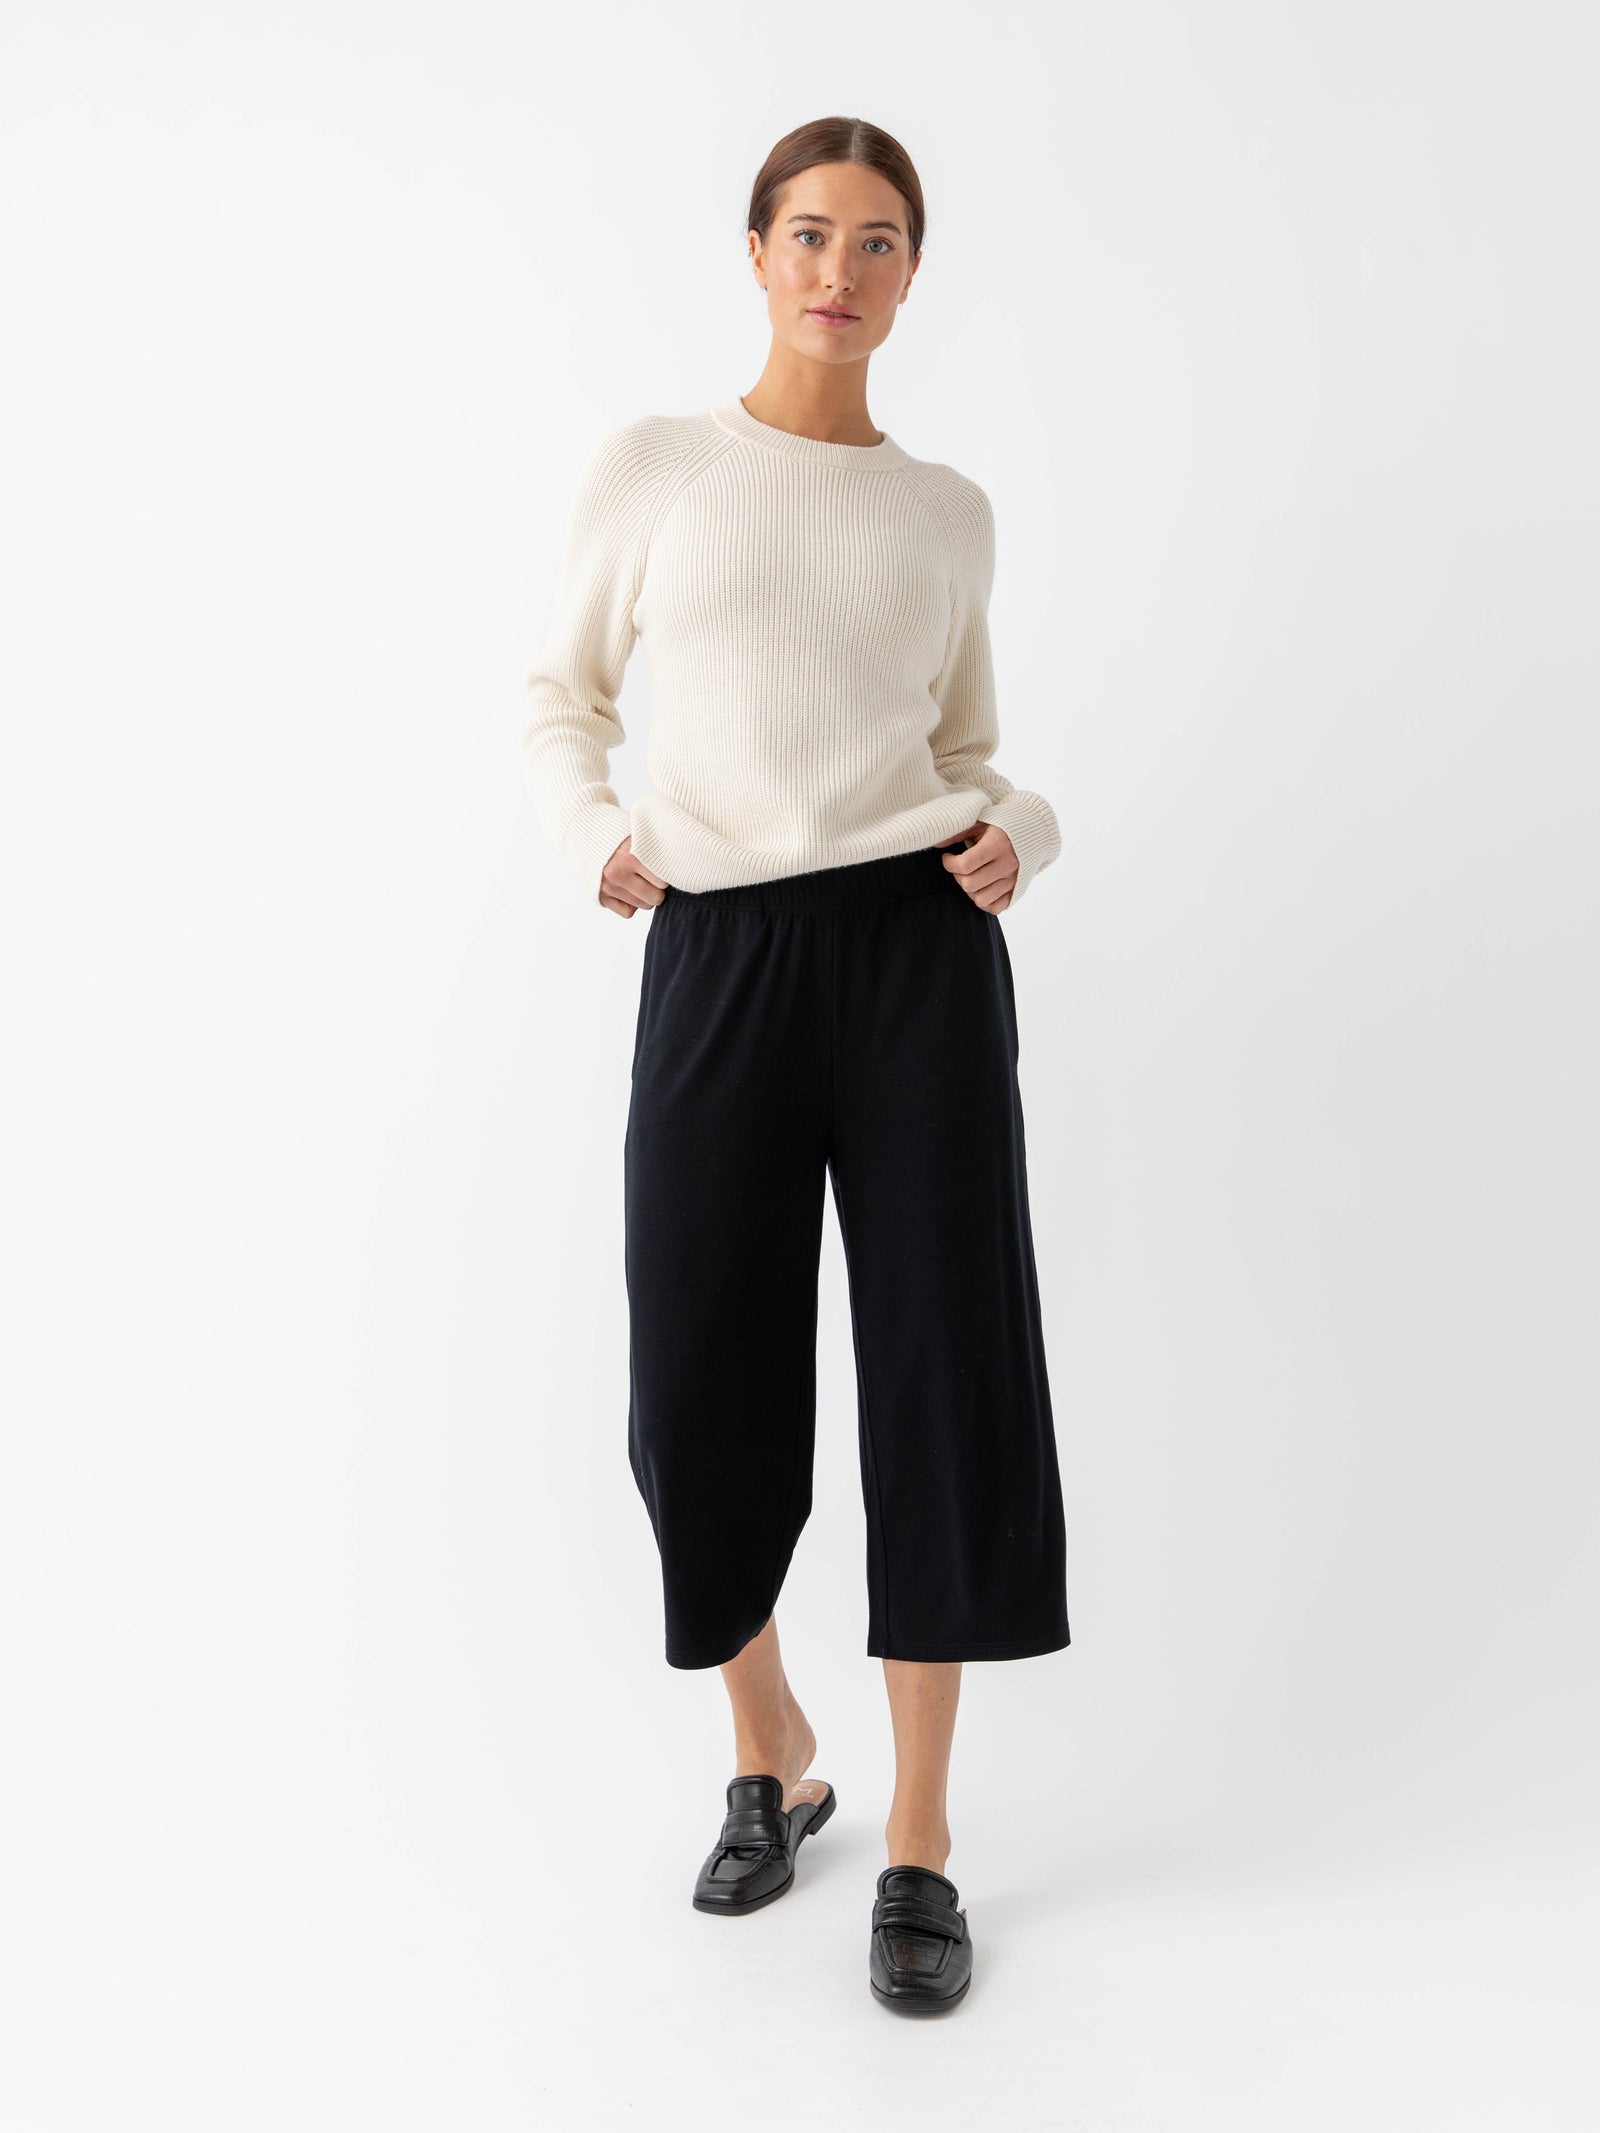 Woman wearing alabaster classic crewneck and black pants with white background 